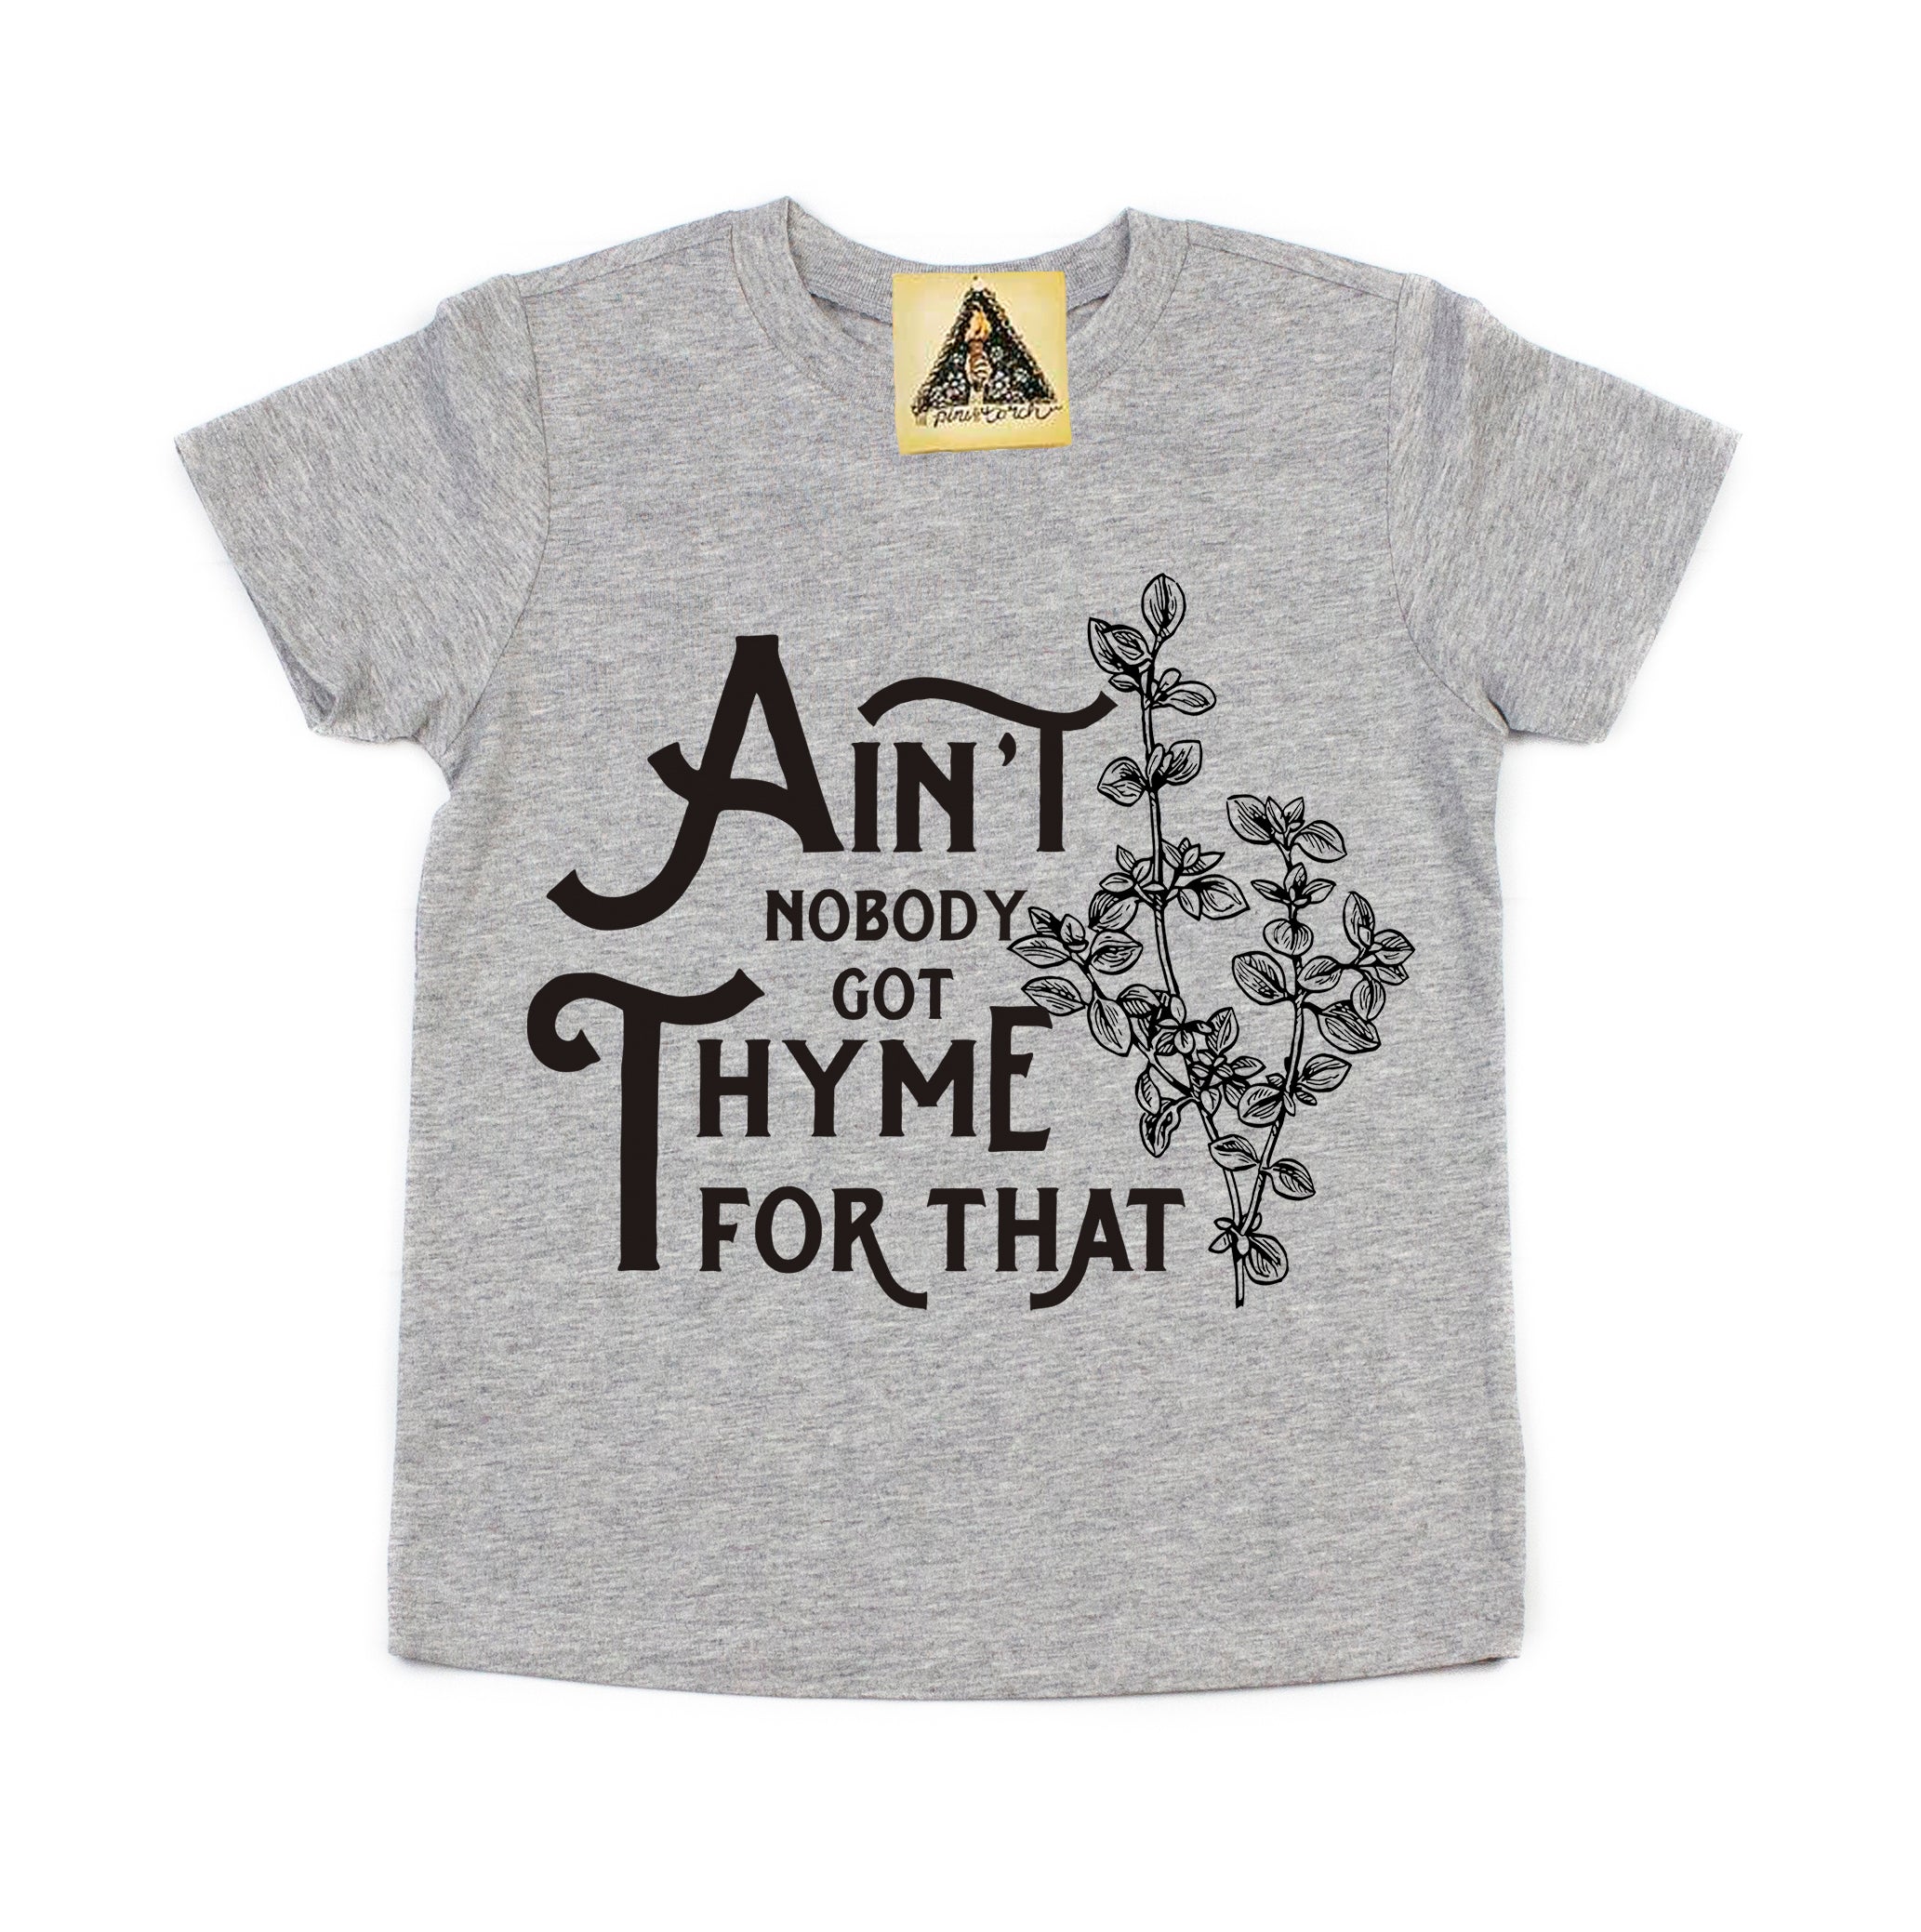 « AIN'T NOBODY GOT THYME FOR THAT » KID'S TEE